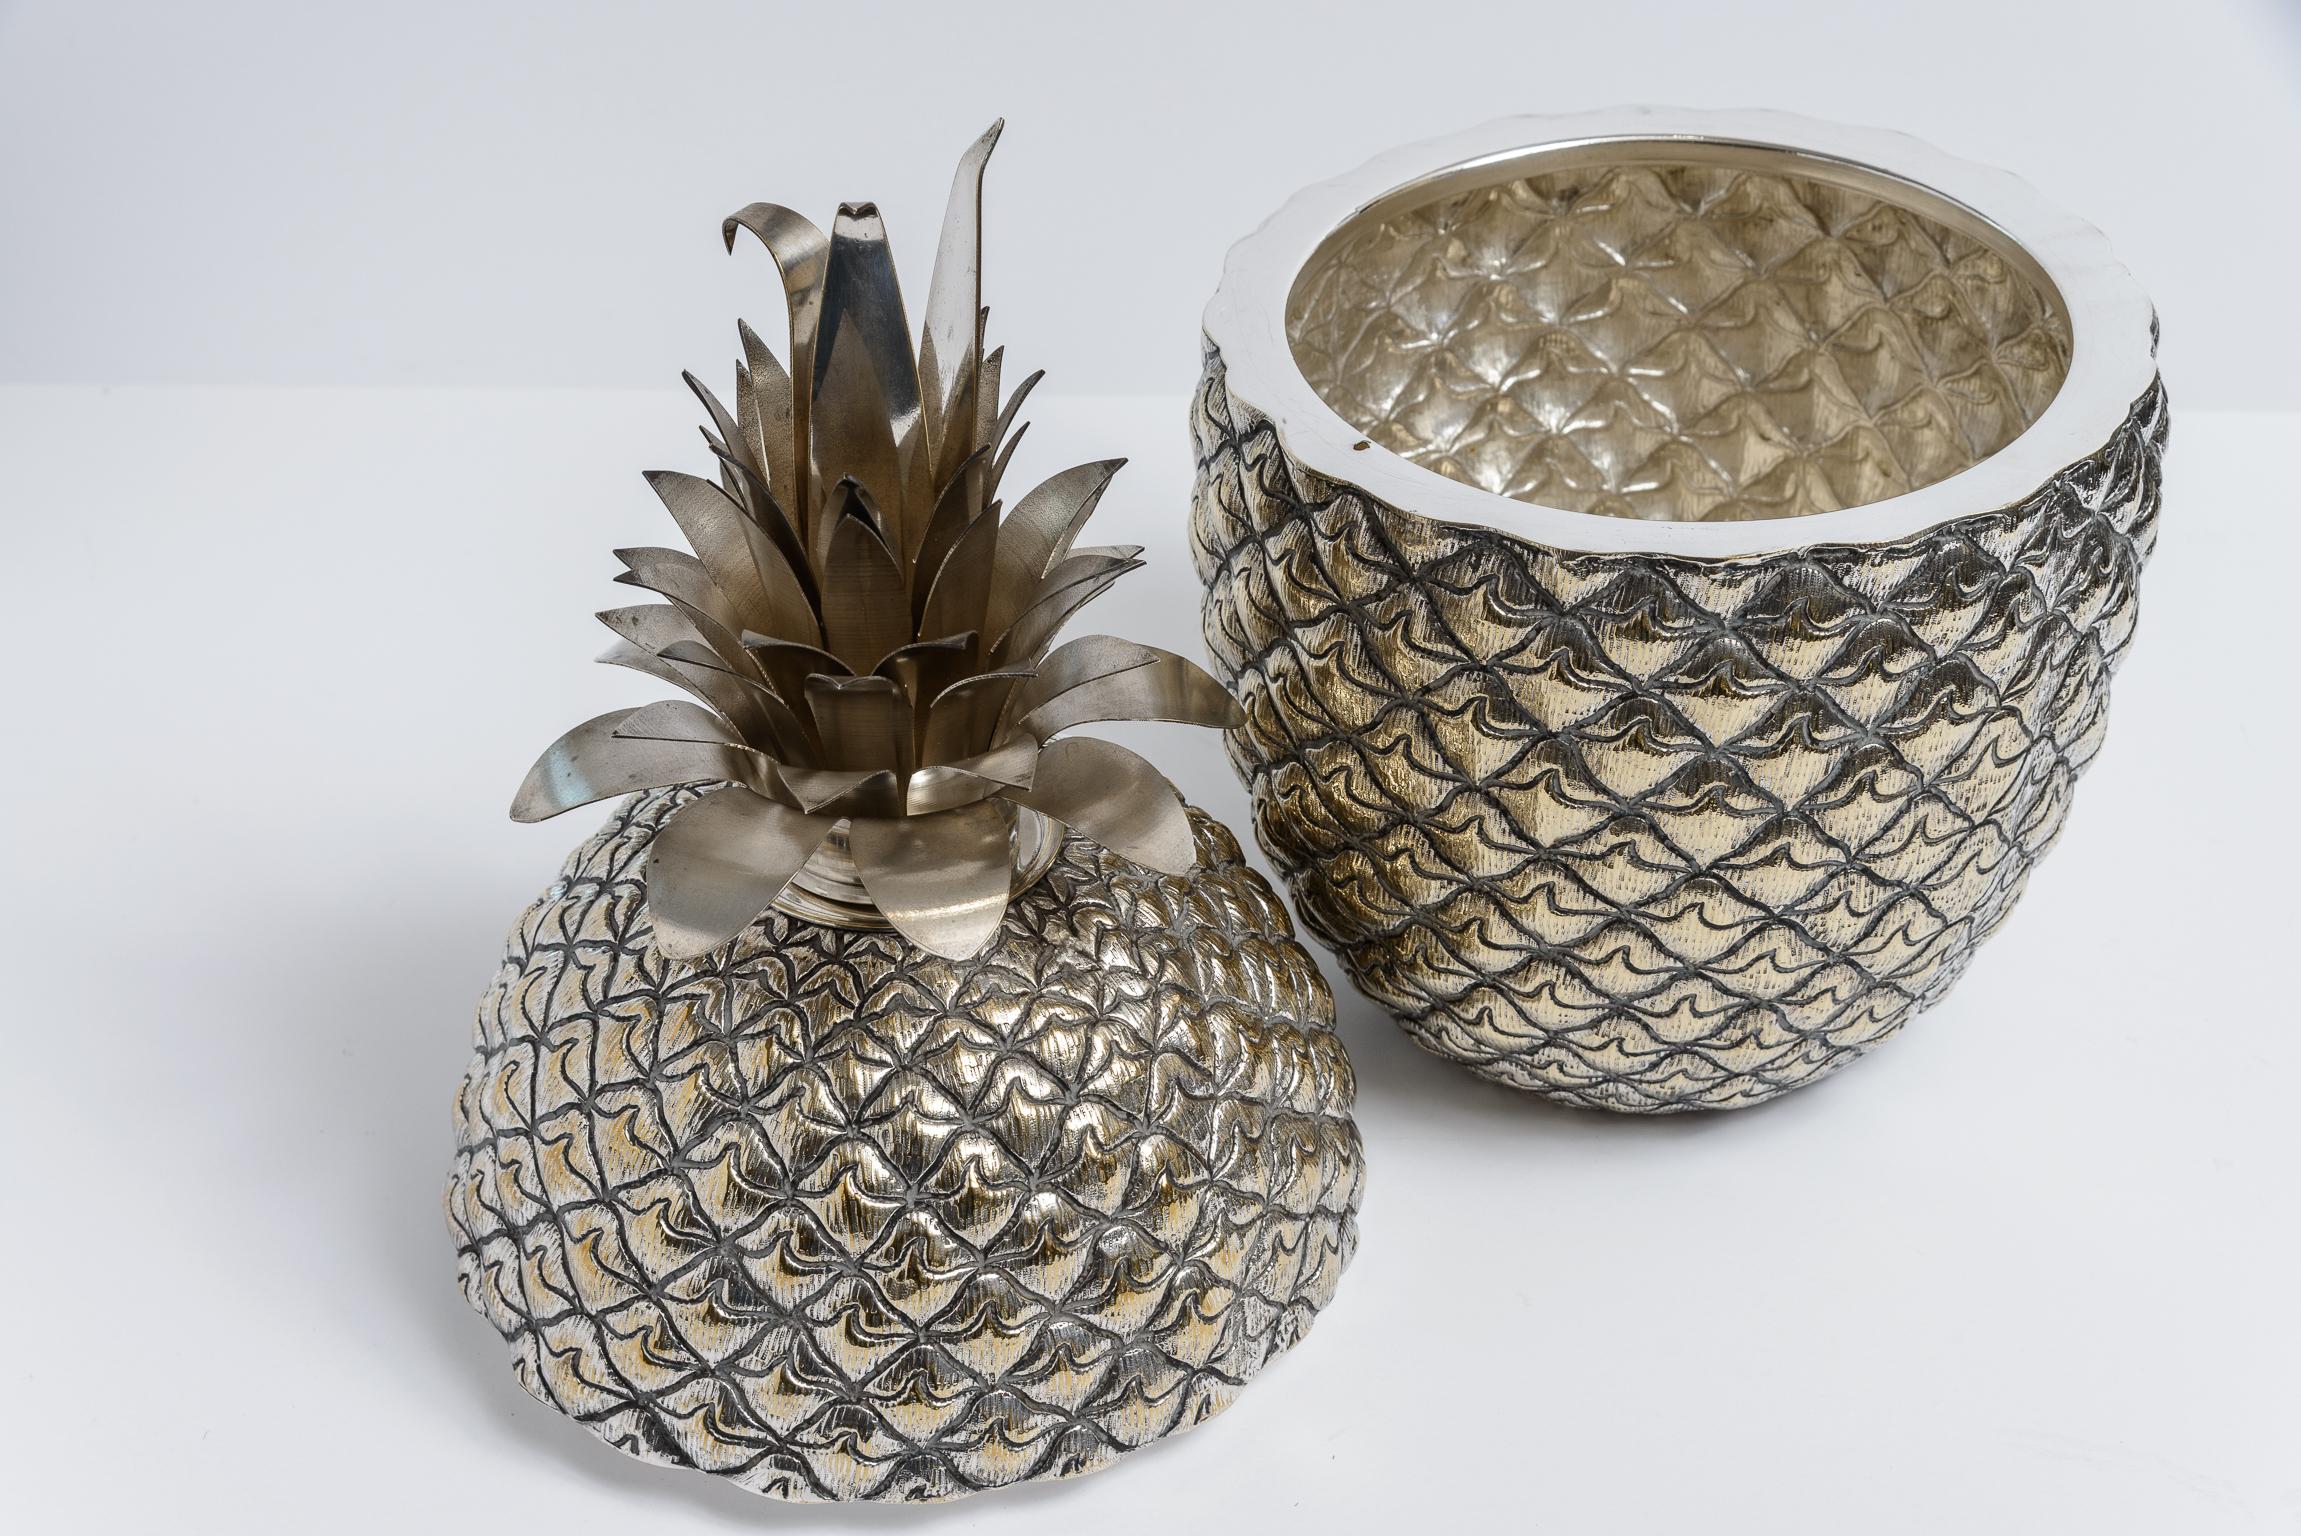 This a beautiful Pineapple Ice Bucket, Silver Plate Extra Large, from Portugal.
Very big, 20